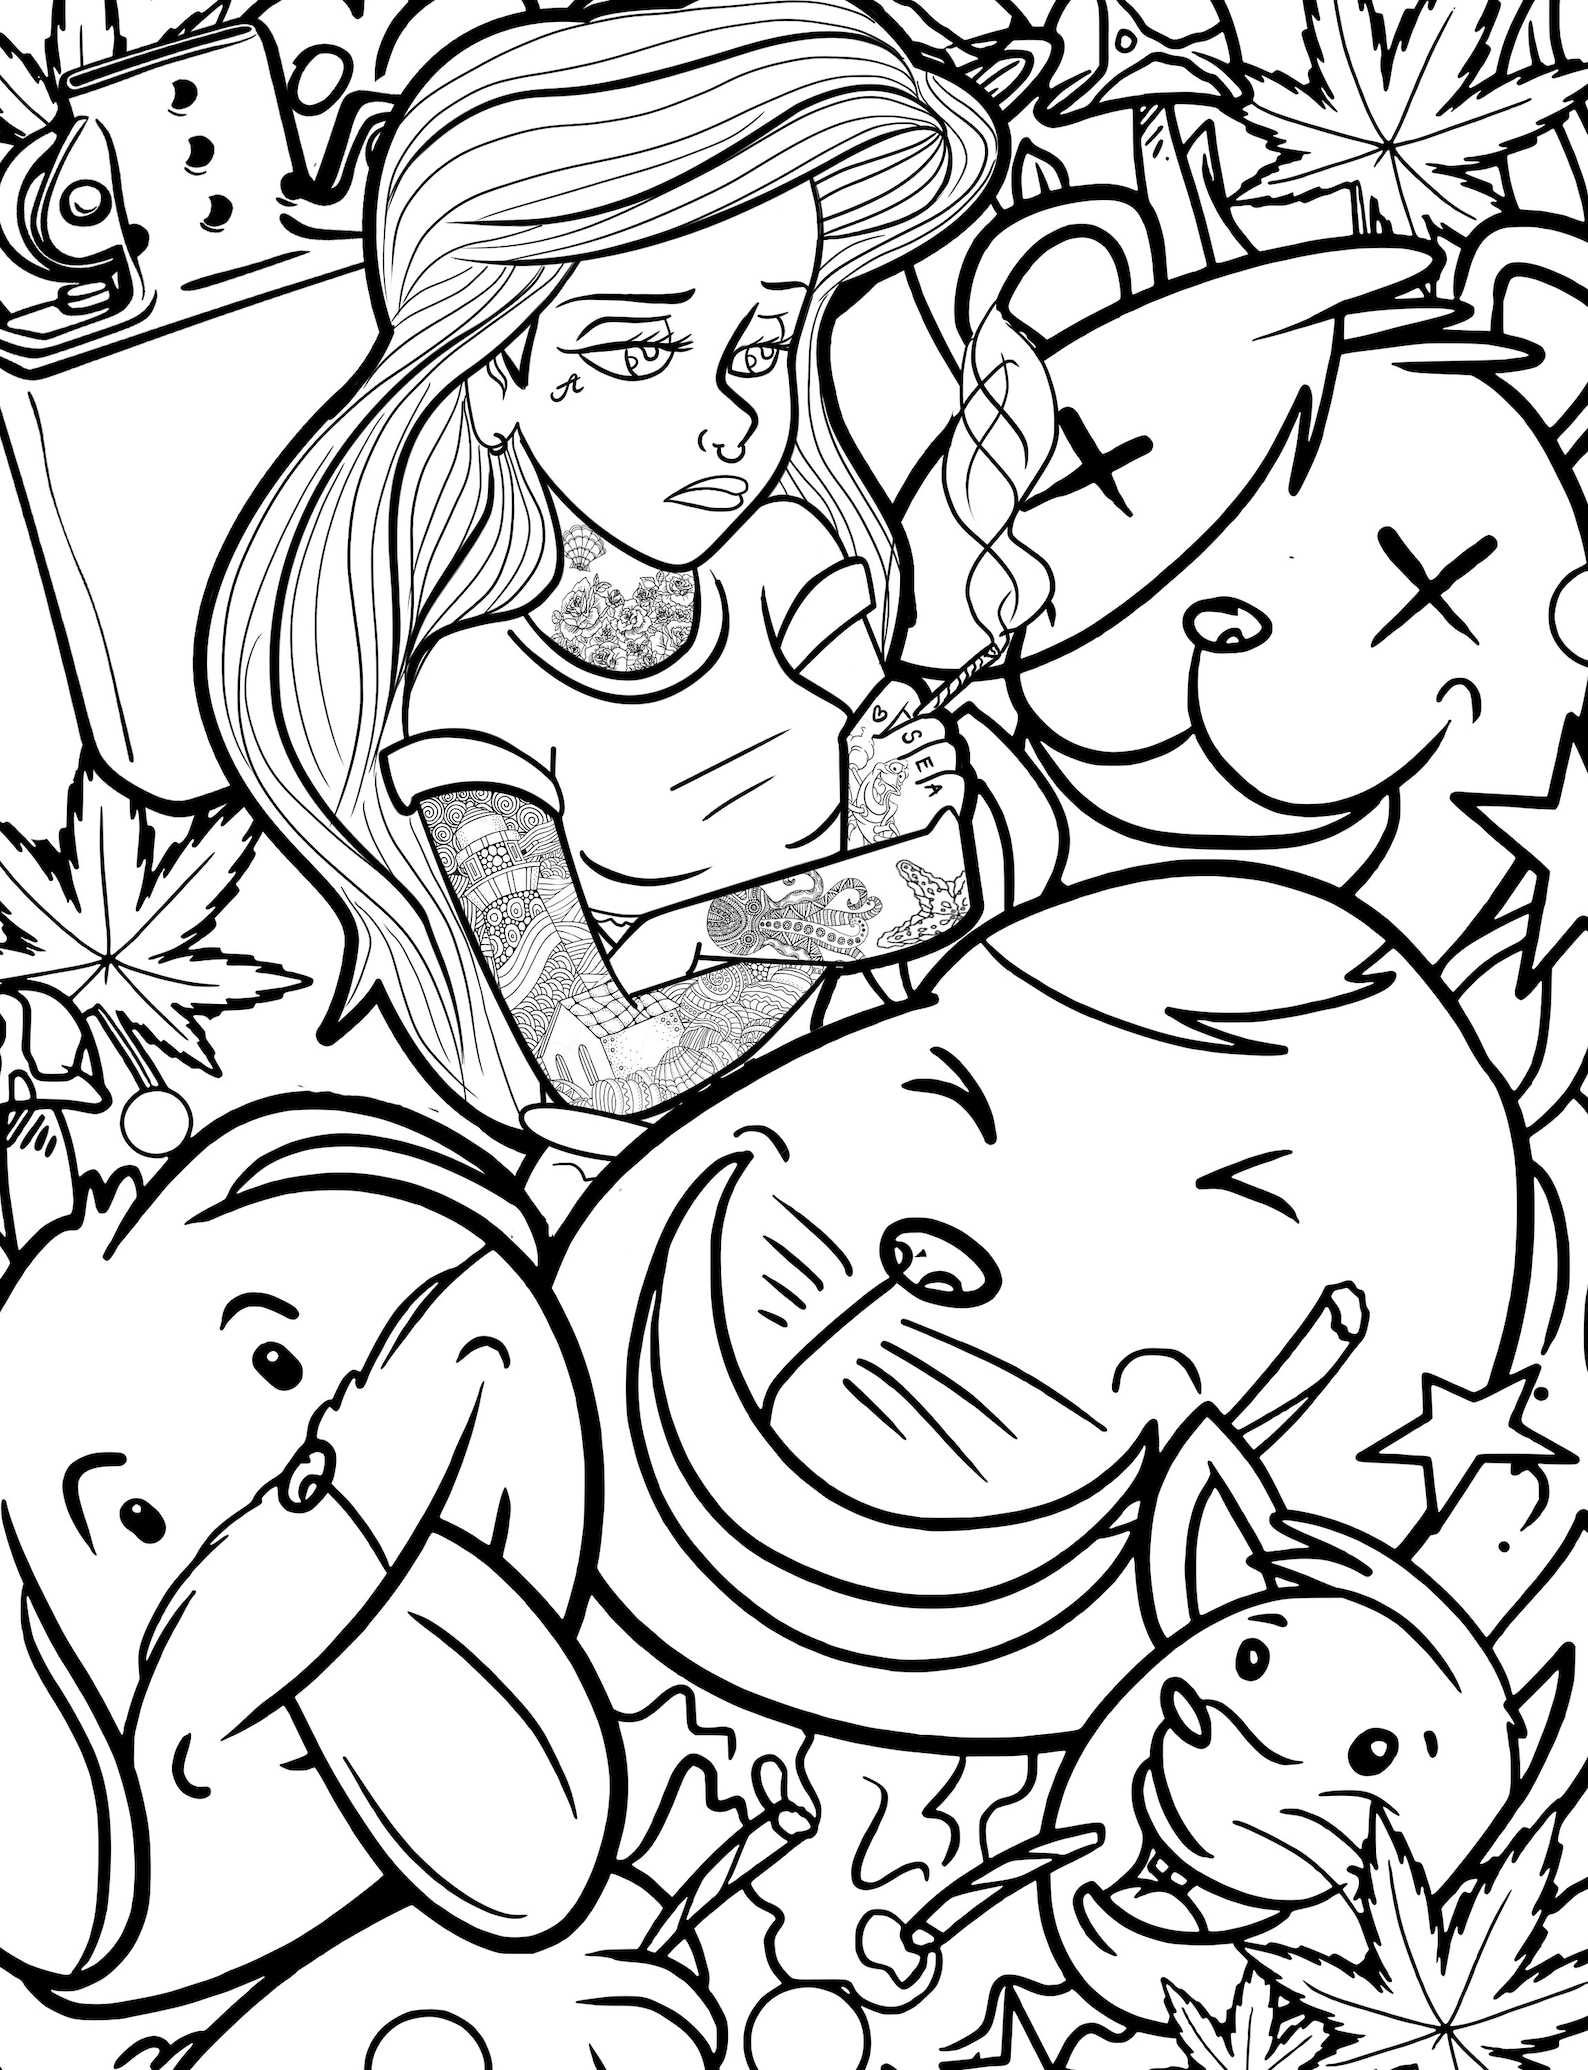 Stoner Coloring Pages For Adult